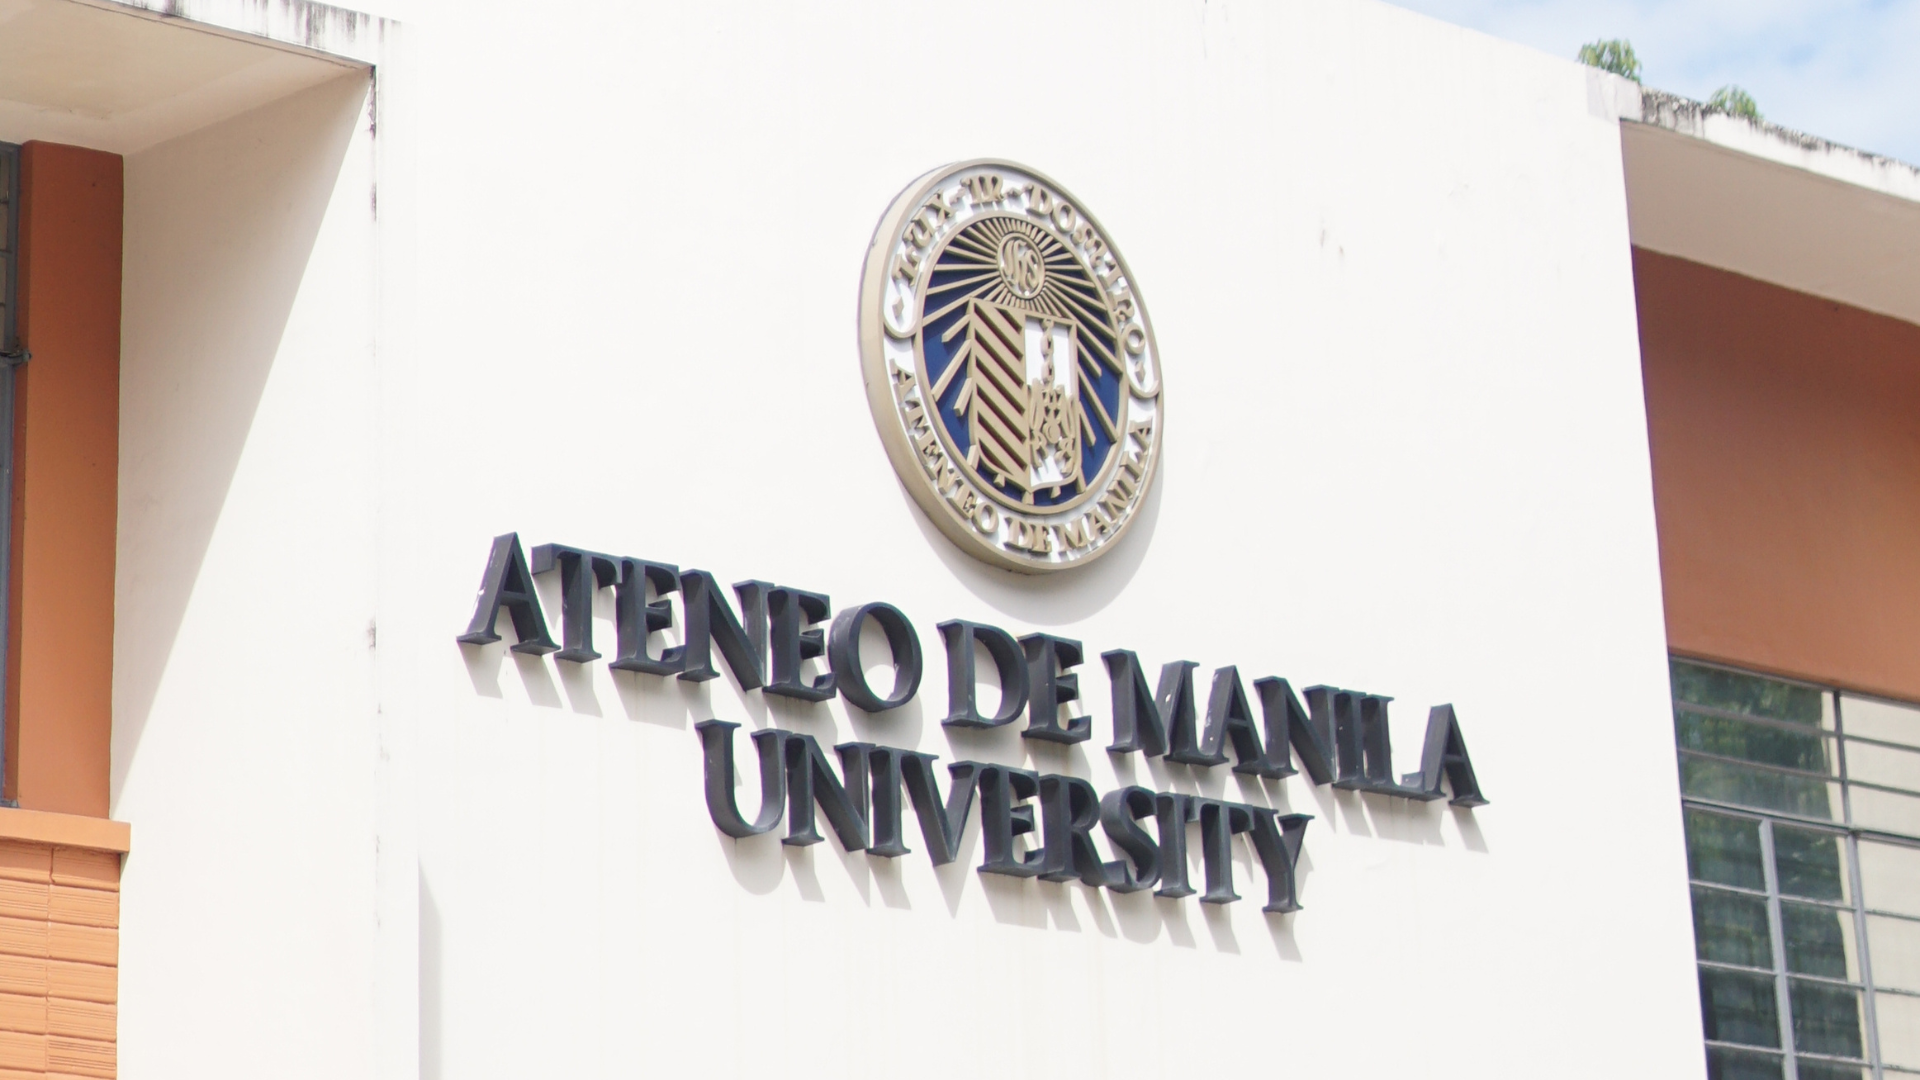 Ateneo-based theology center airs view on divorce